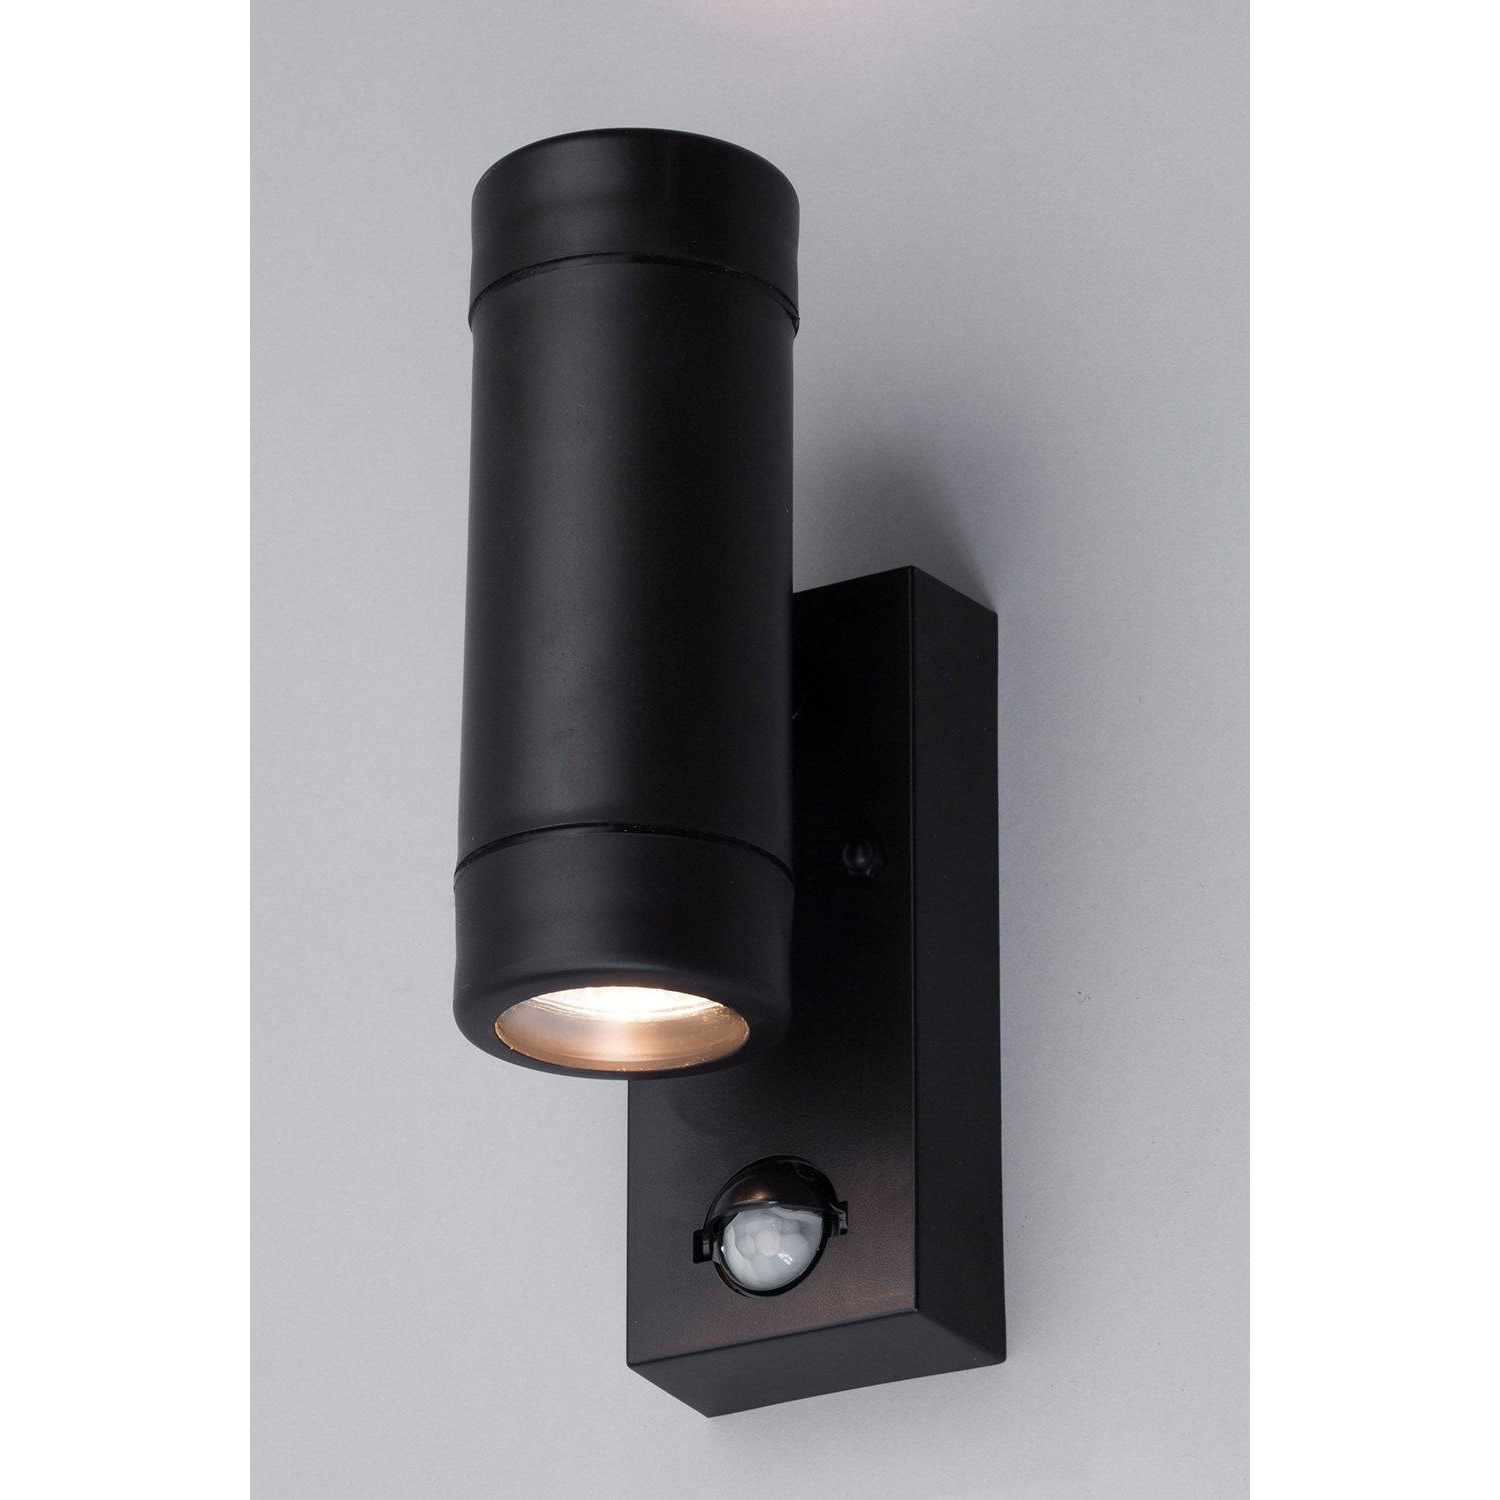 Fara Up and Down Outdoor Wall Light with Sensor - image 1